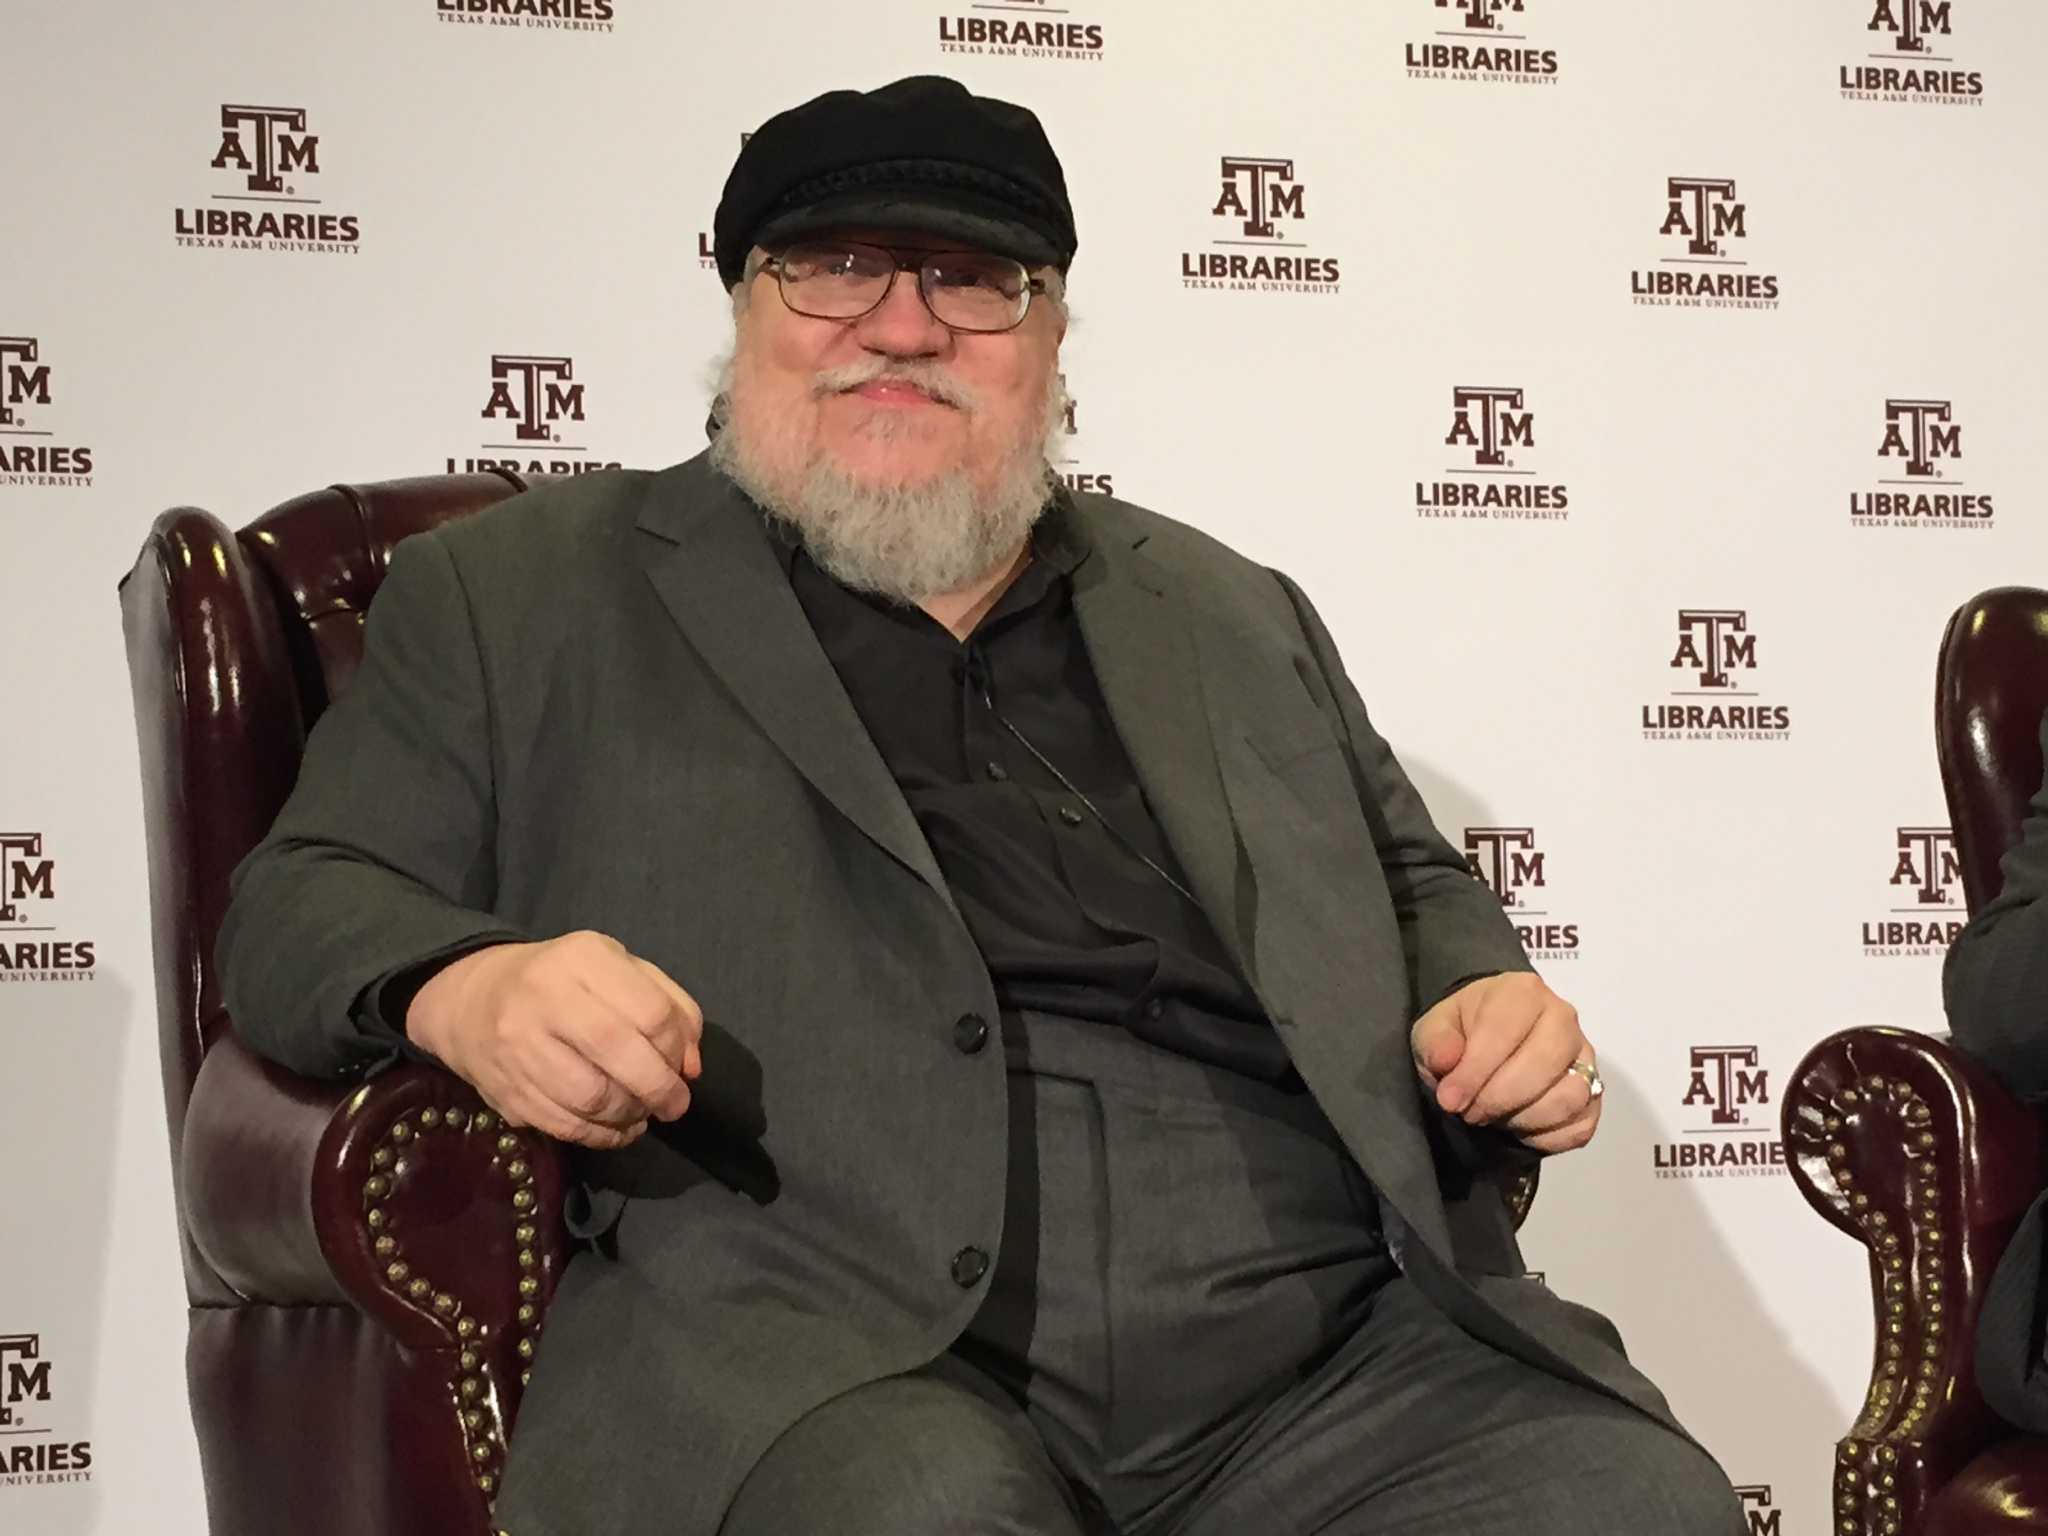 A&M to give Game of Thrones author George R.R. Martin honorary degree - Houston Chronicle2048 x 1536